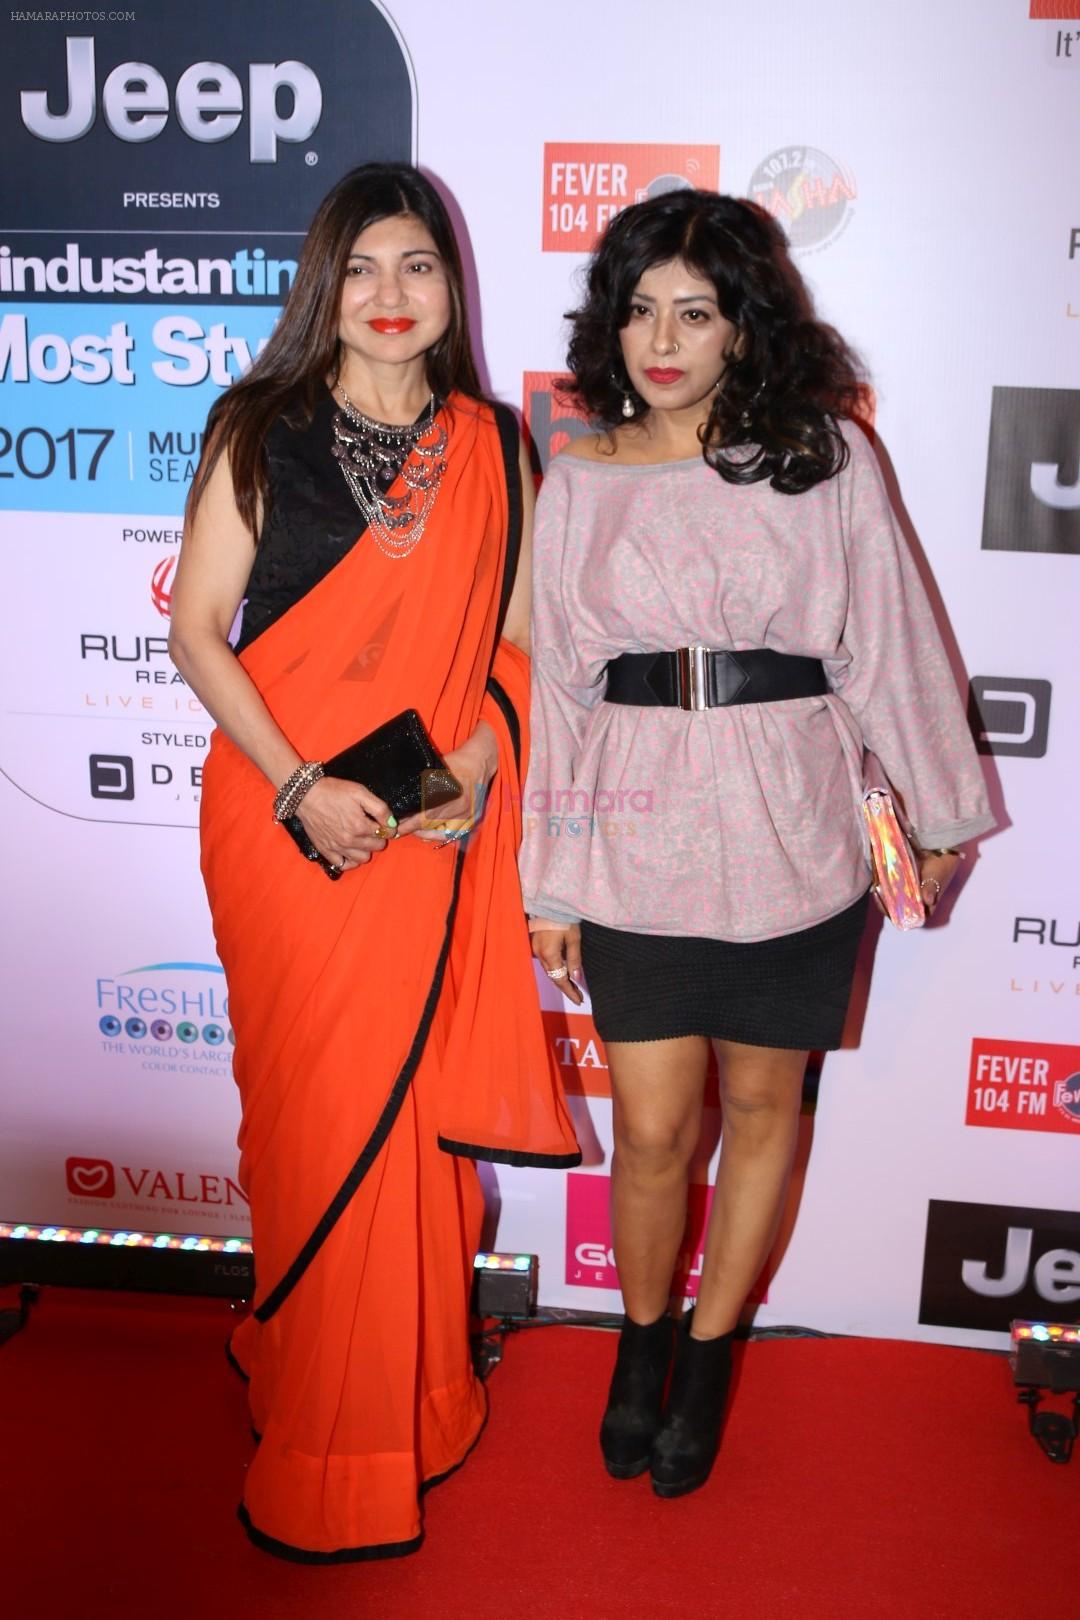 Alka Yagnik at the Red Carpet Of Most Stylish Awards 2017 on 24th March 2017